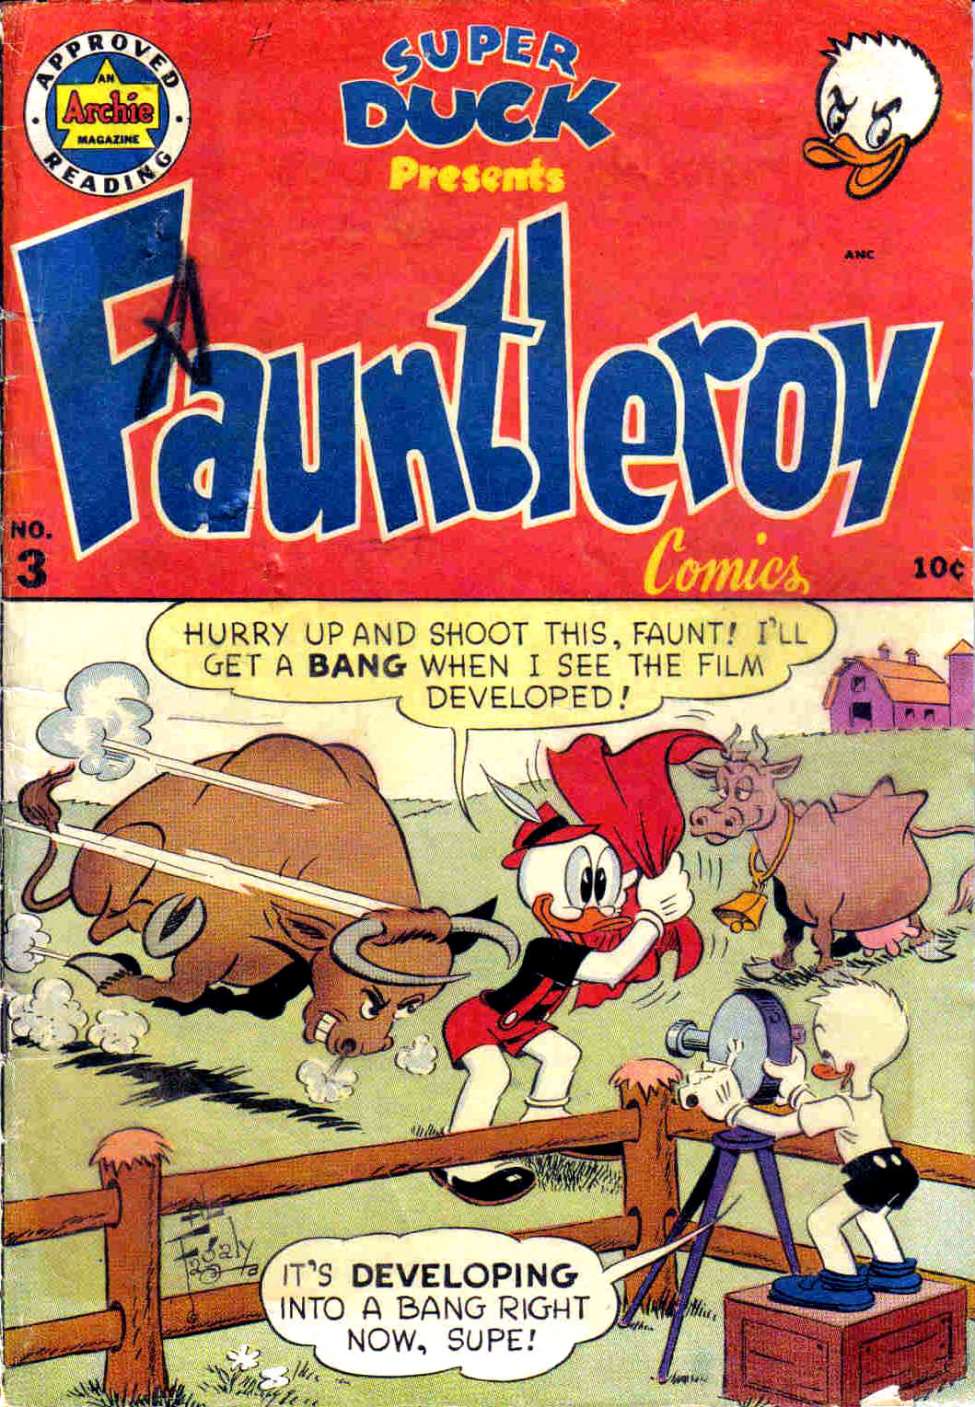 Book Cover For Fauntleroy Comics 3